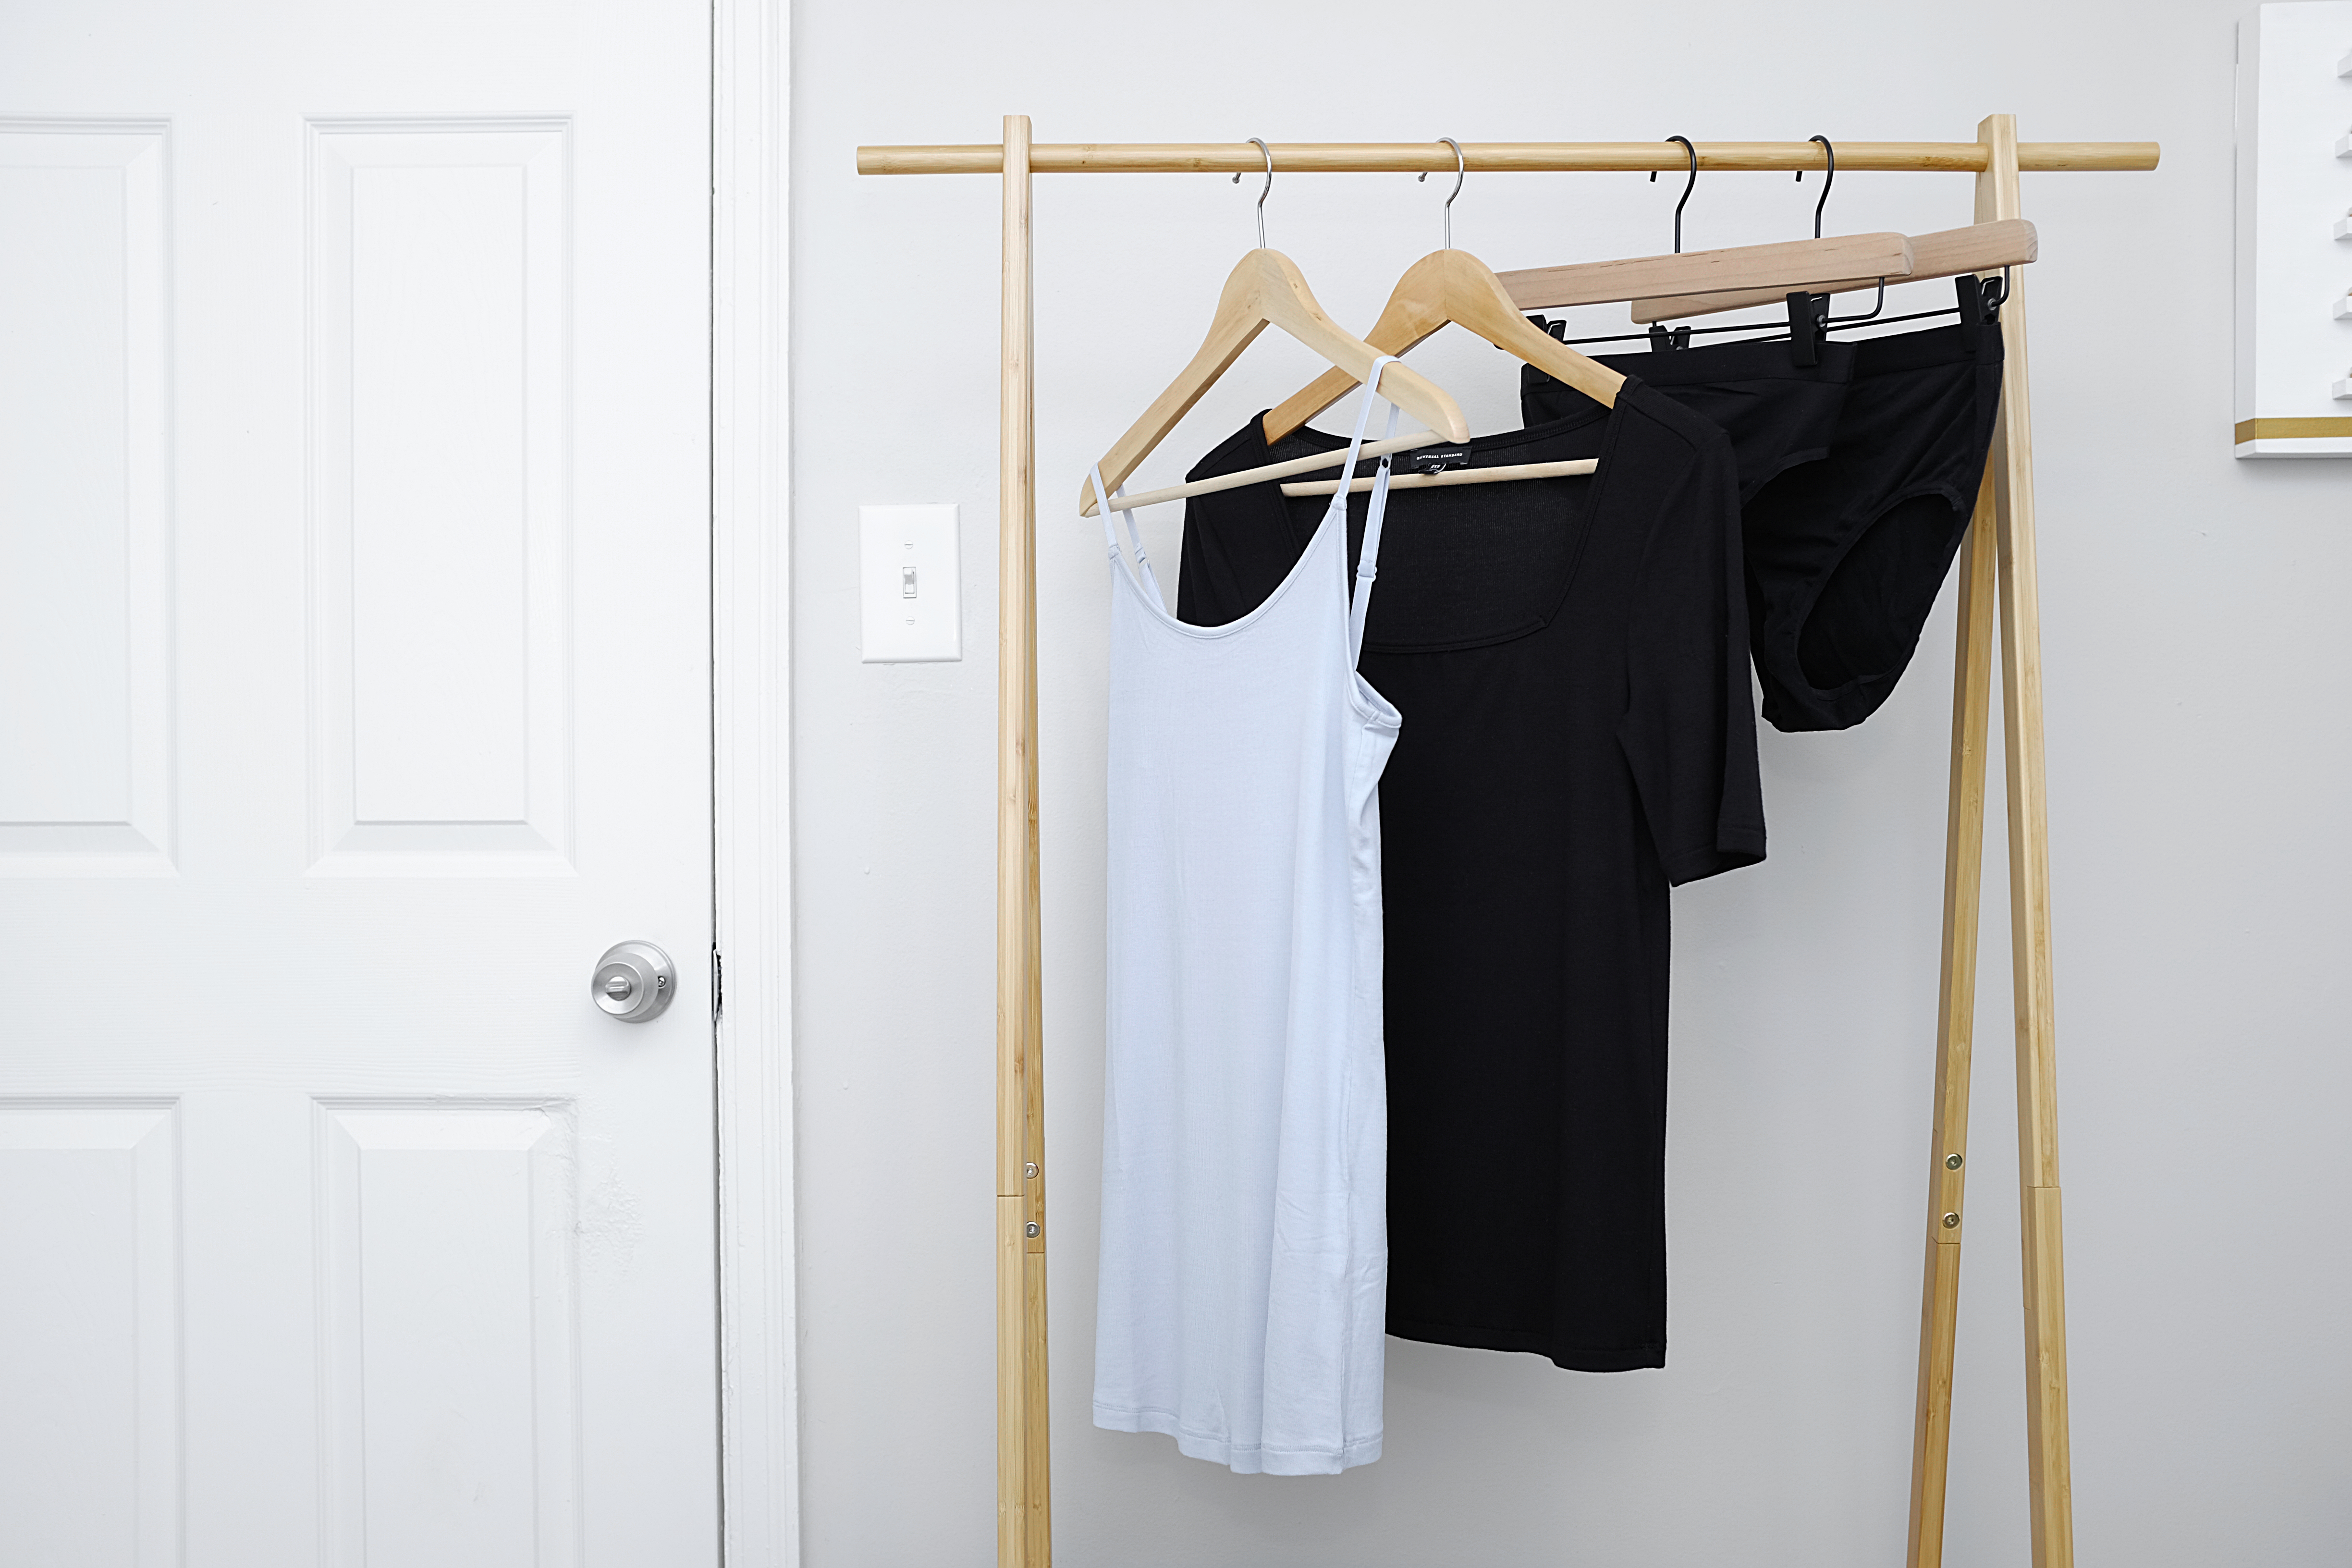 Four garments from Universal Standard hang on a clothing rack